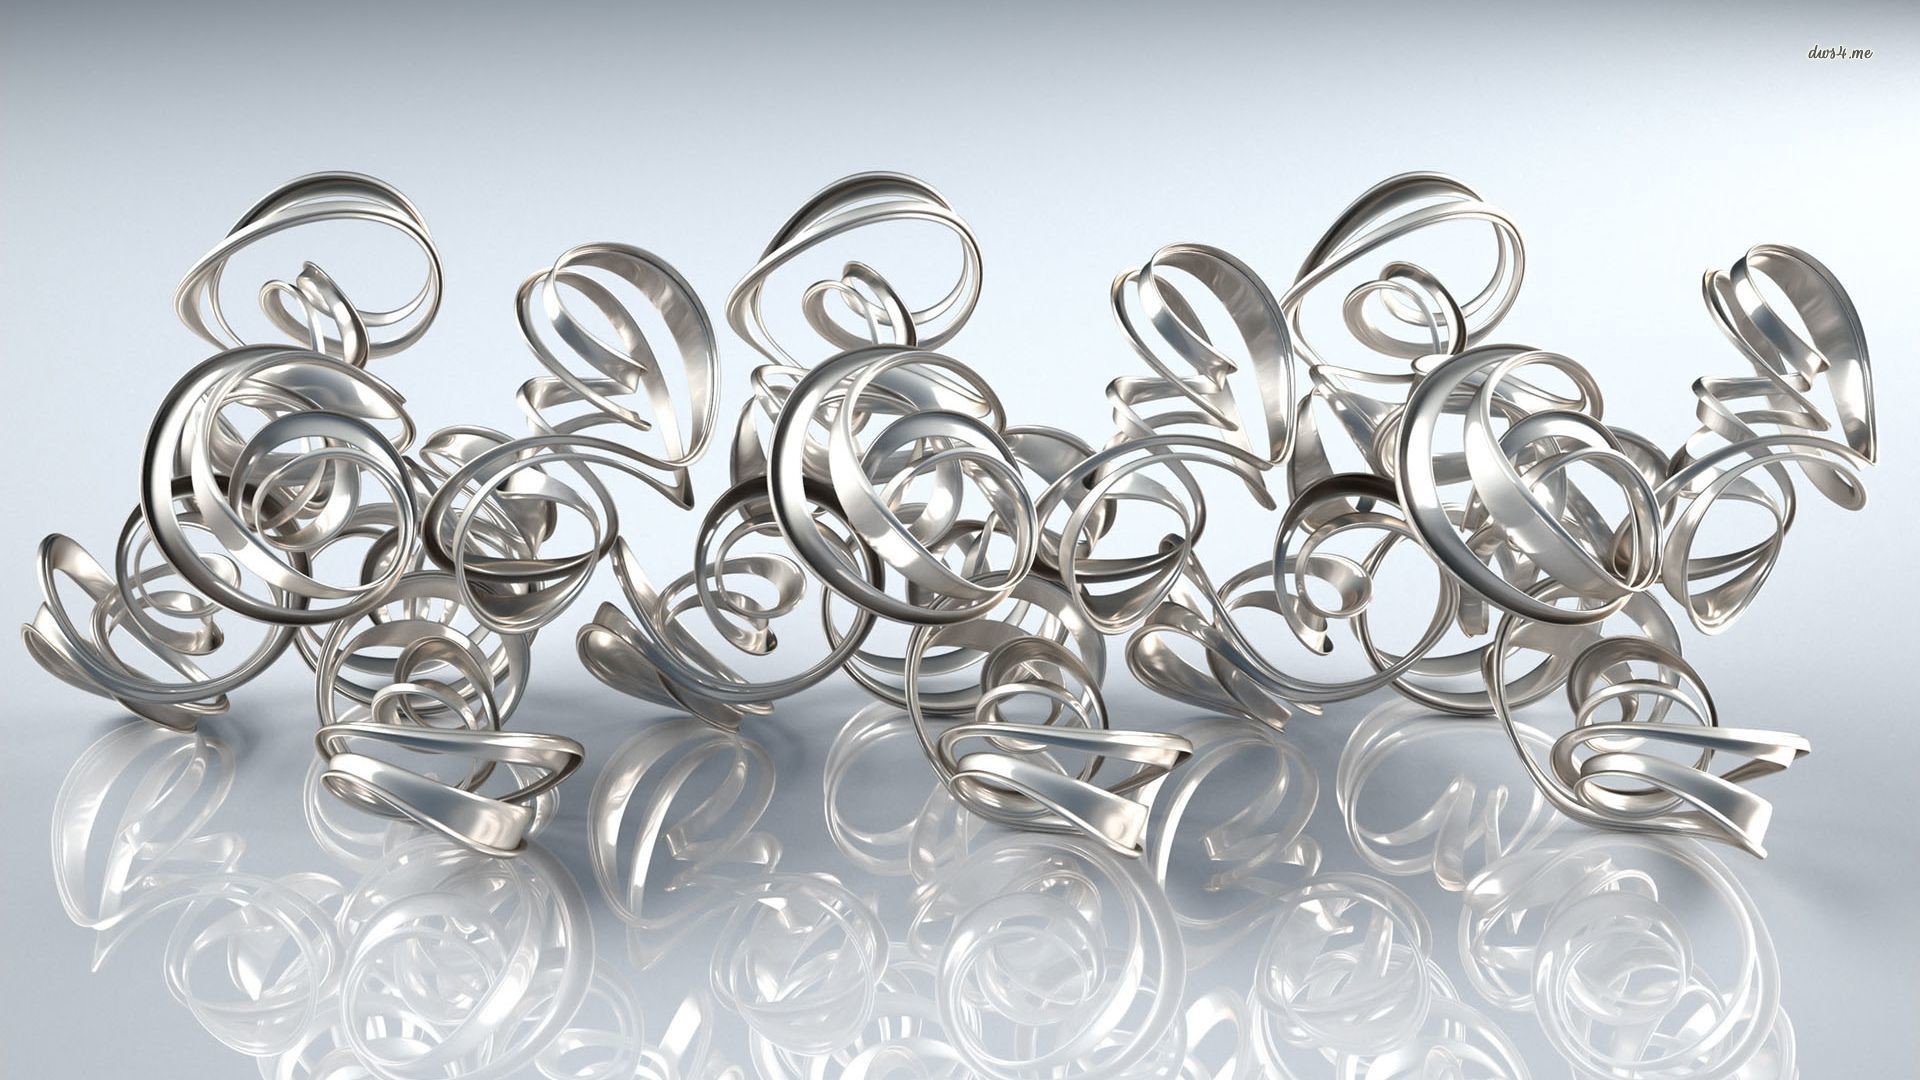 1920x1080 TWISTED SILVER METALLIC SHAPES WALLPAPER